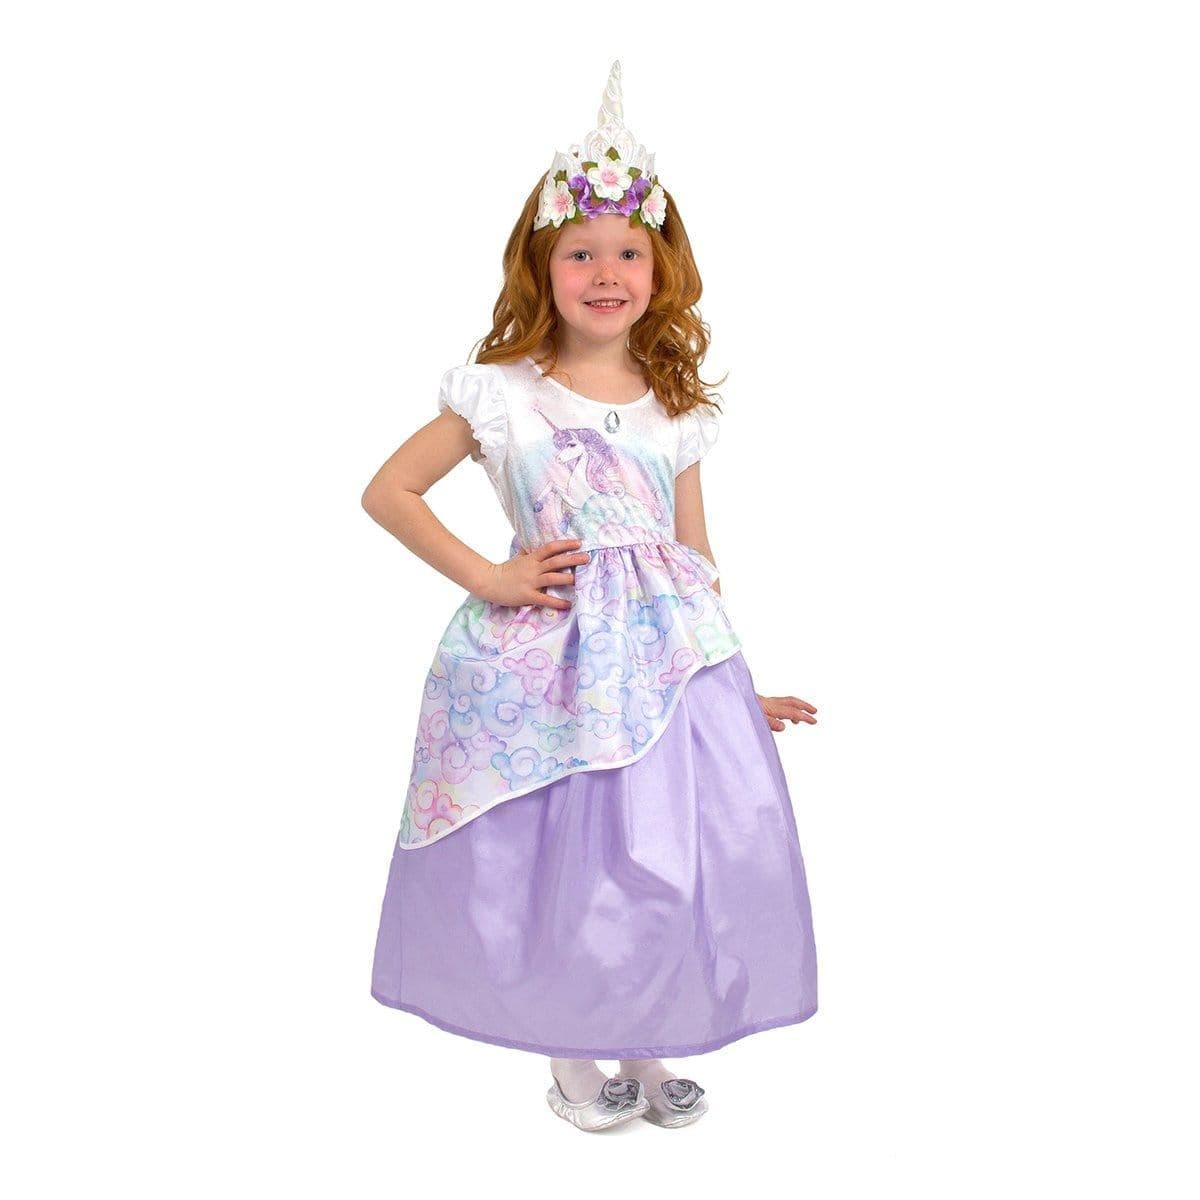 Buy Costumes Unicorn Princess Costume for Kids sold at Party Expert